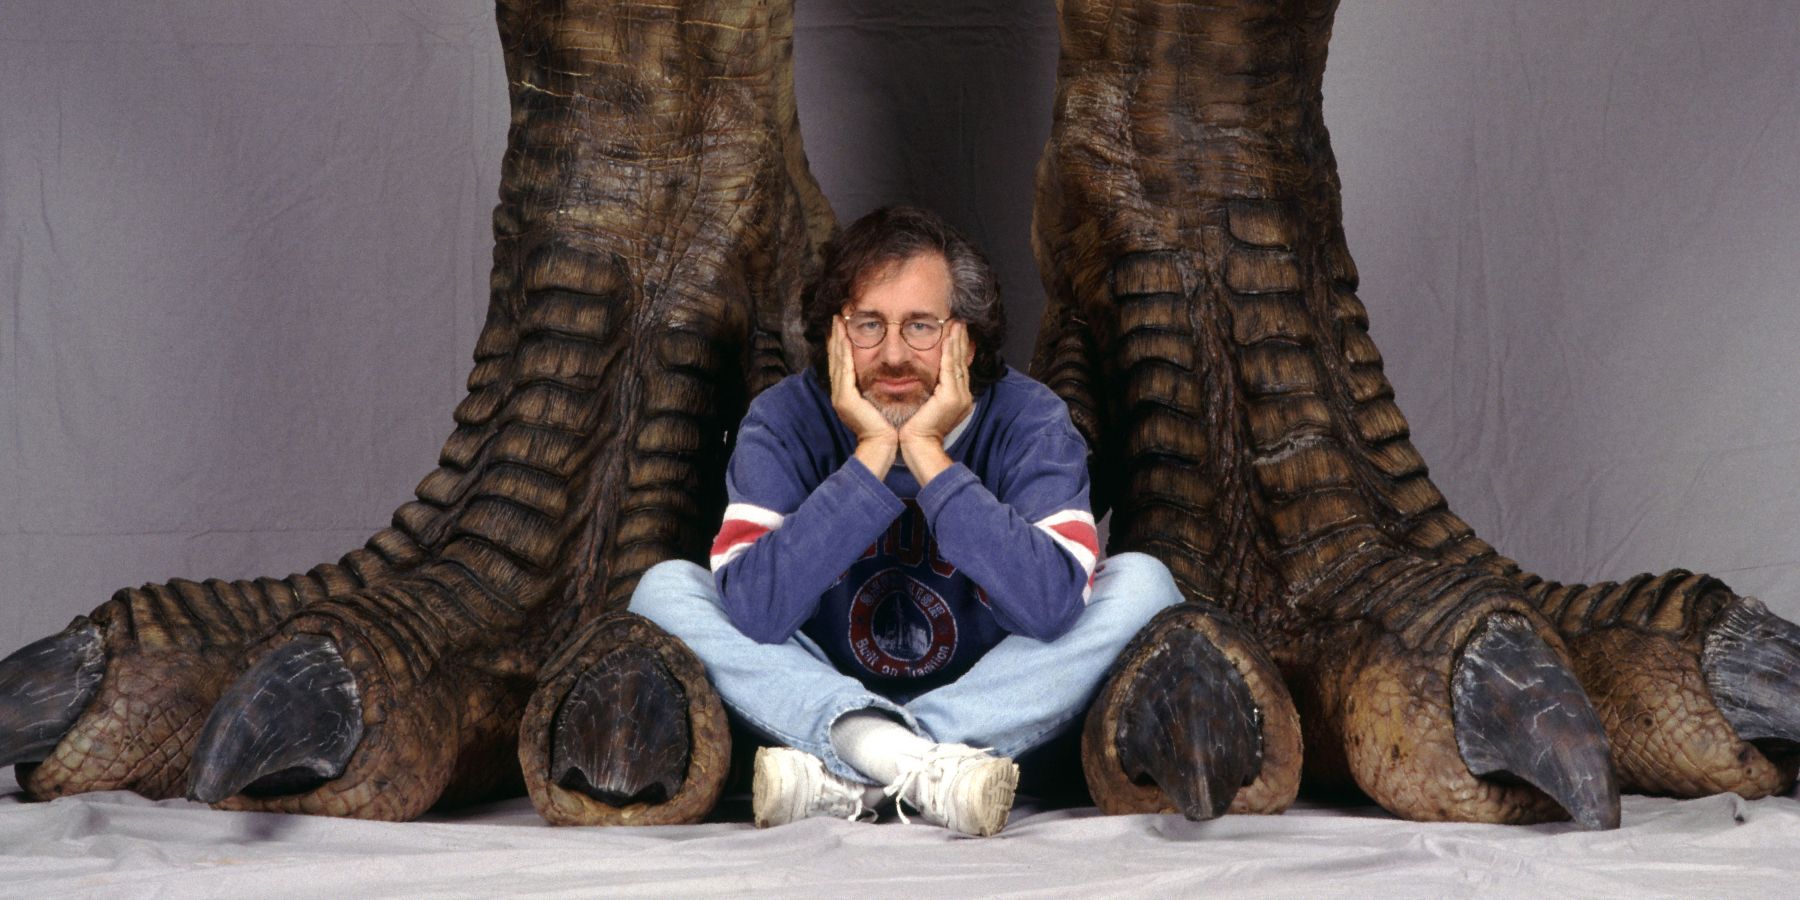 Steven Spielberg sitting between the feet of a T Rex in a promo image for Jurassic Park